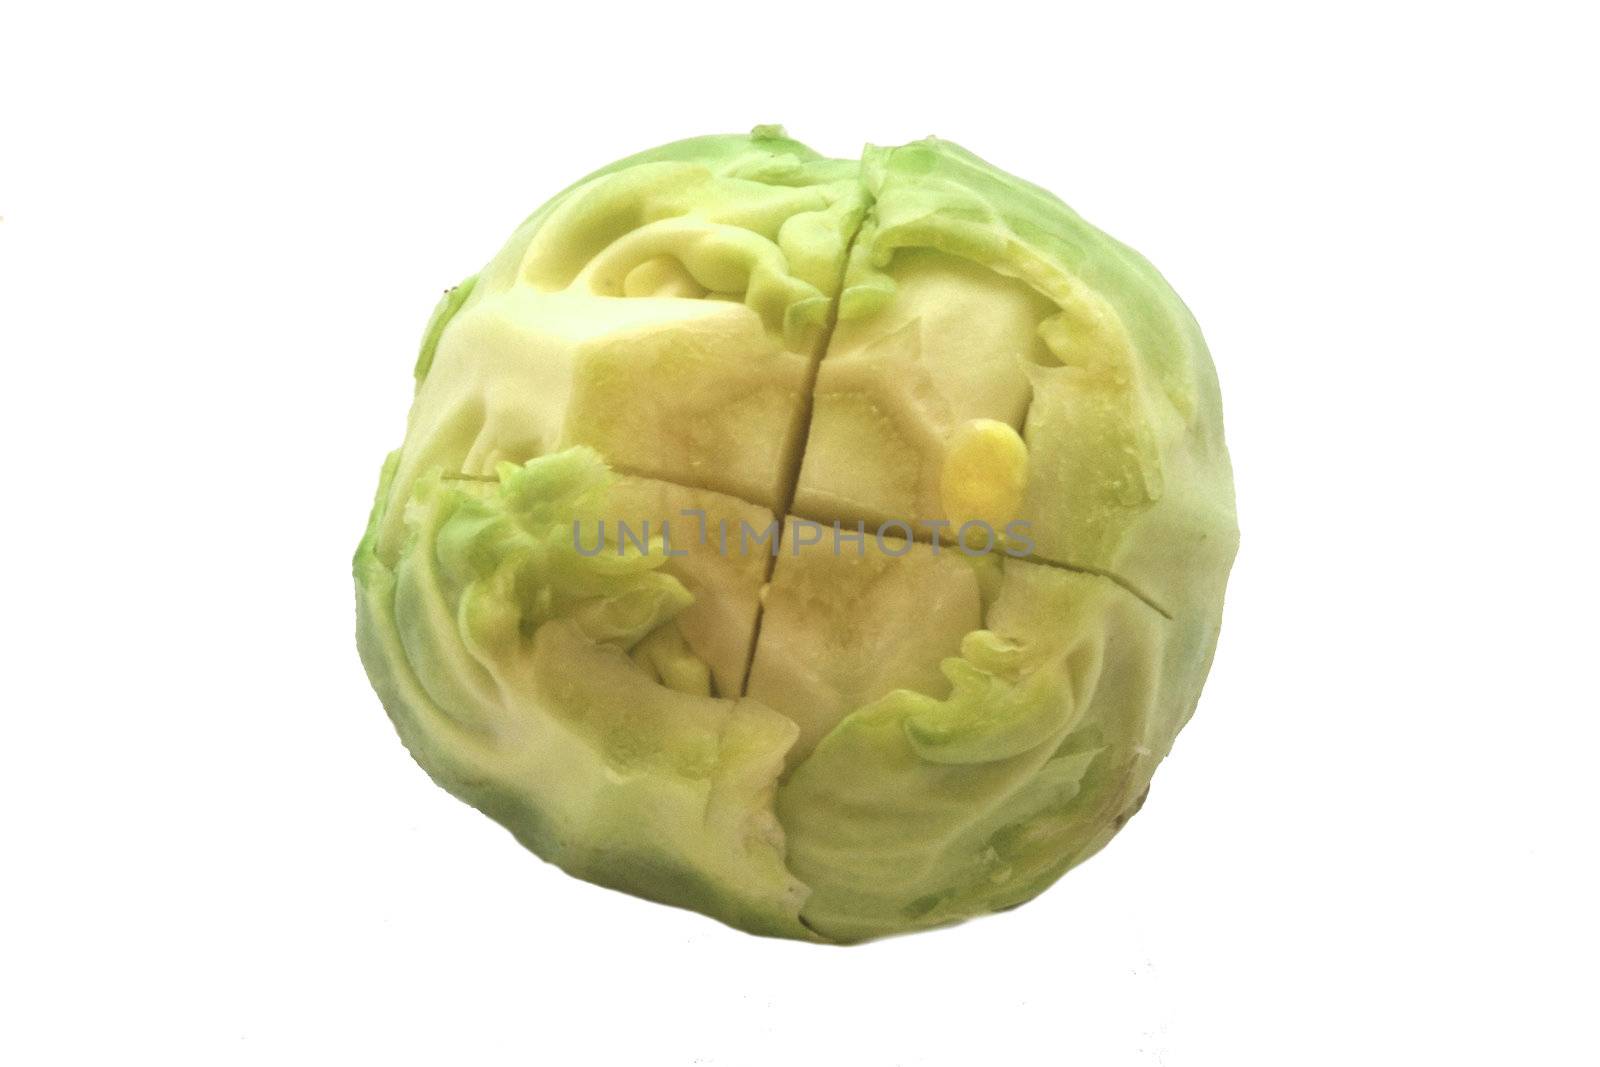 Single raw sprout